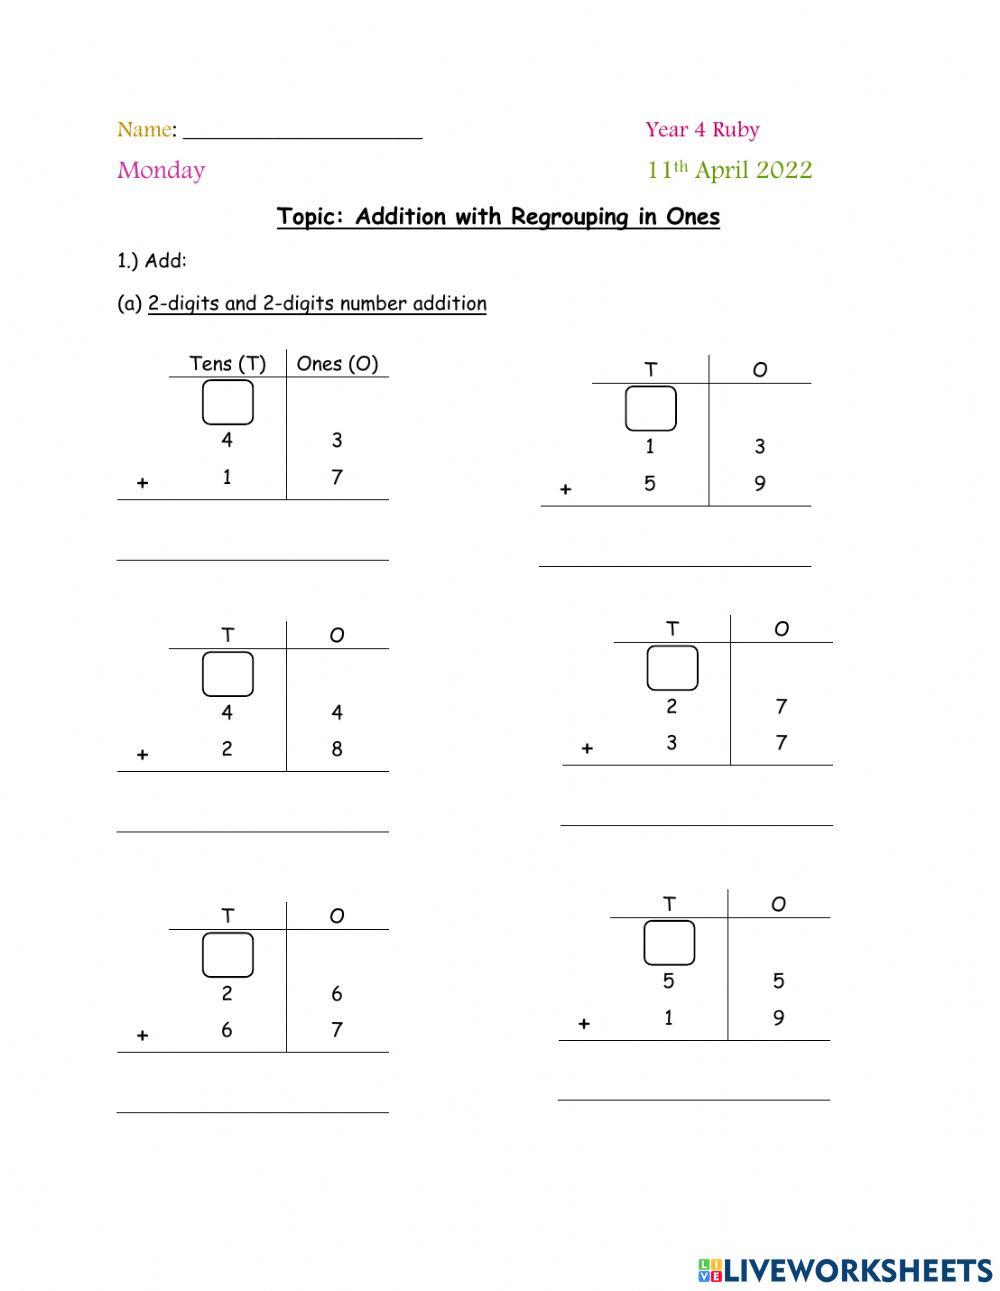 Addition with regrouping in ones (2-digits)